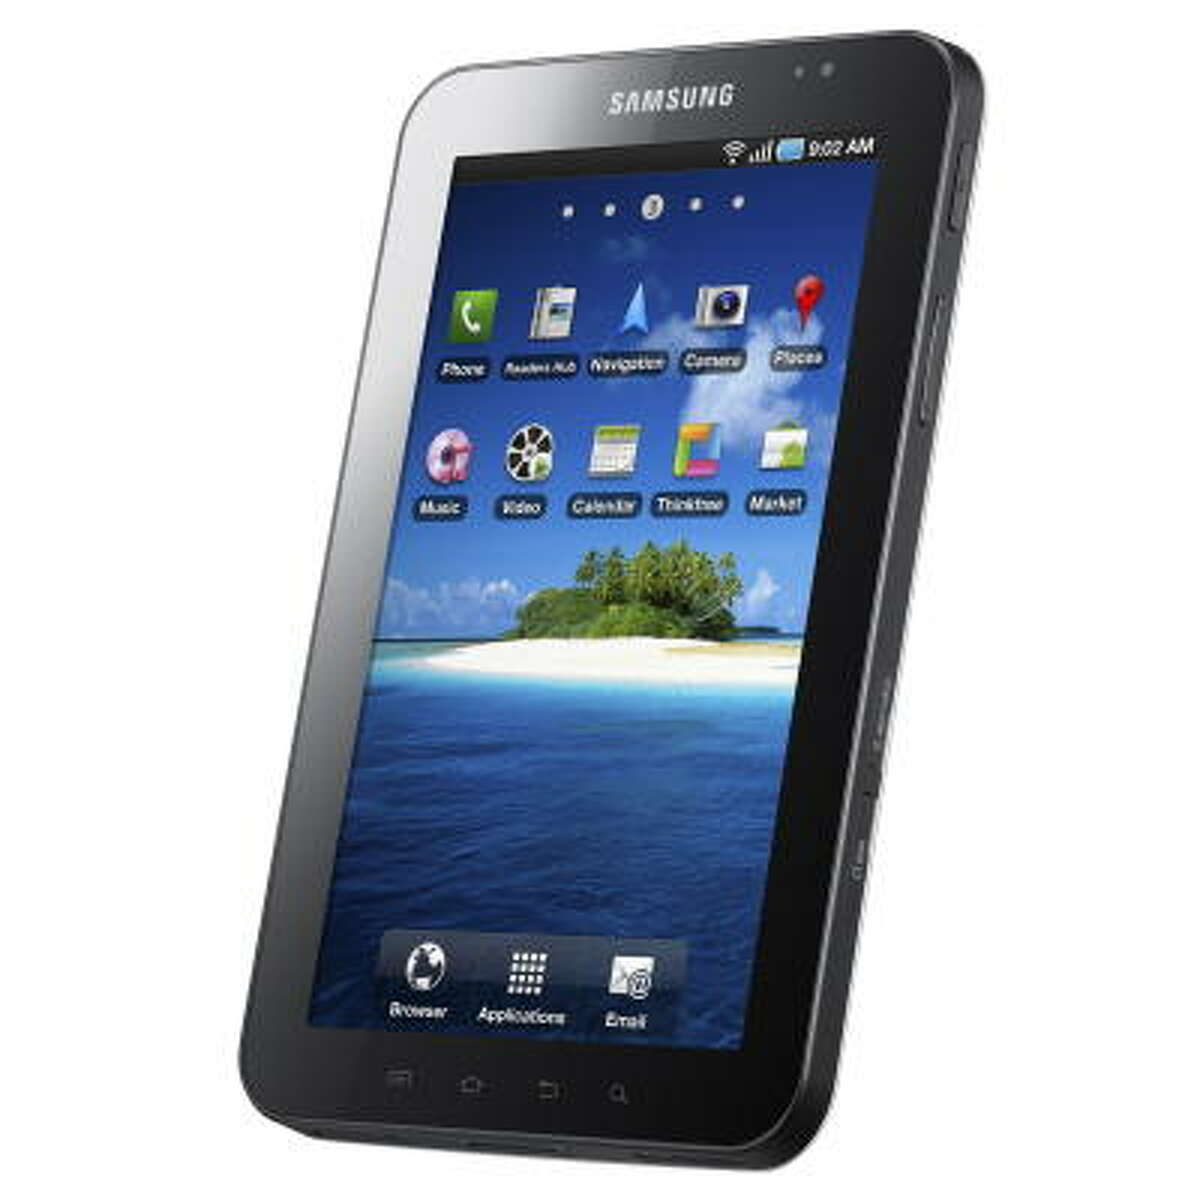 Samsung Galaxy Tab:$400-$650. More interested in a tablet that uses Google’s hot Android operating system? The 7-inch Galaxy Tab is your best bet.